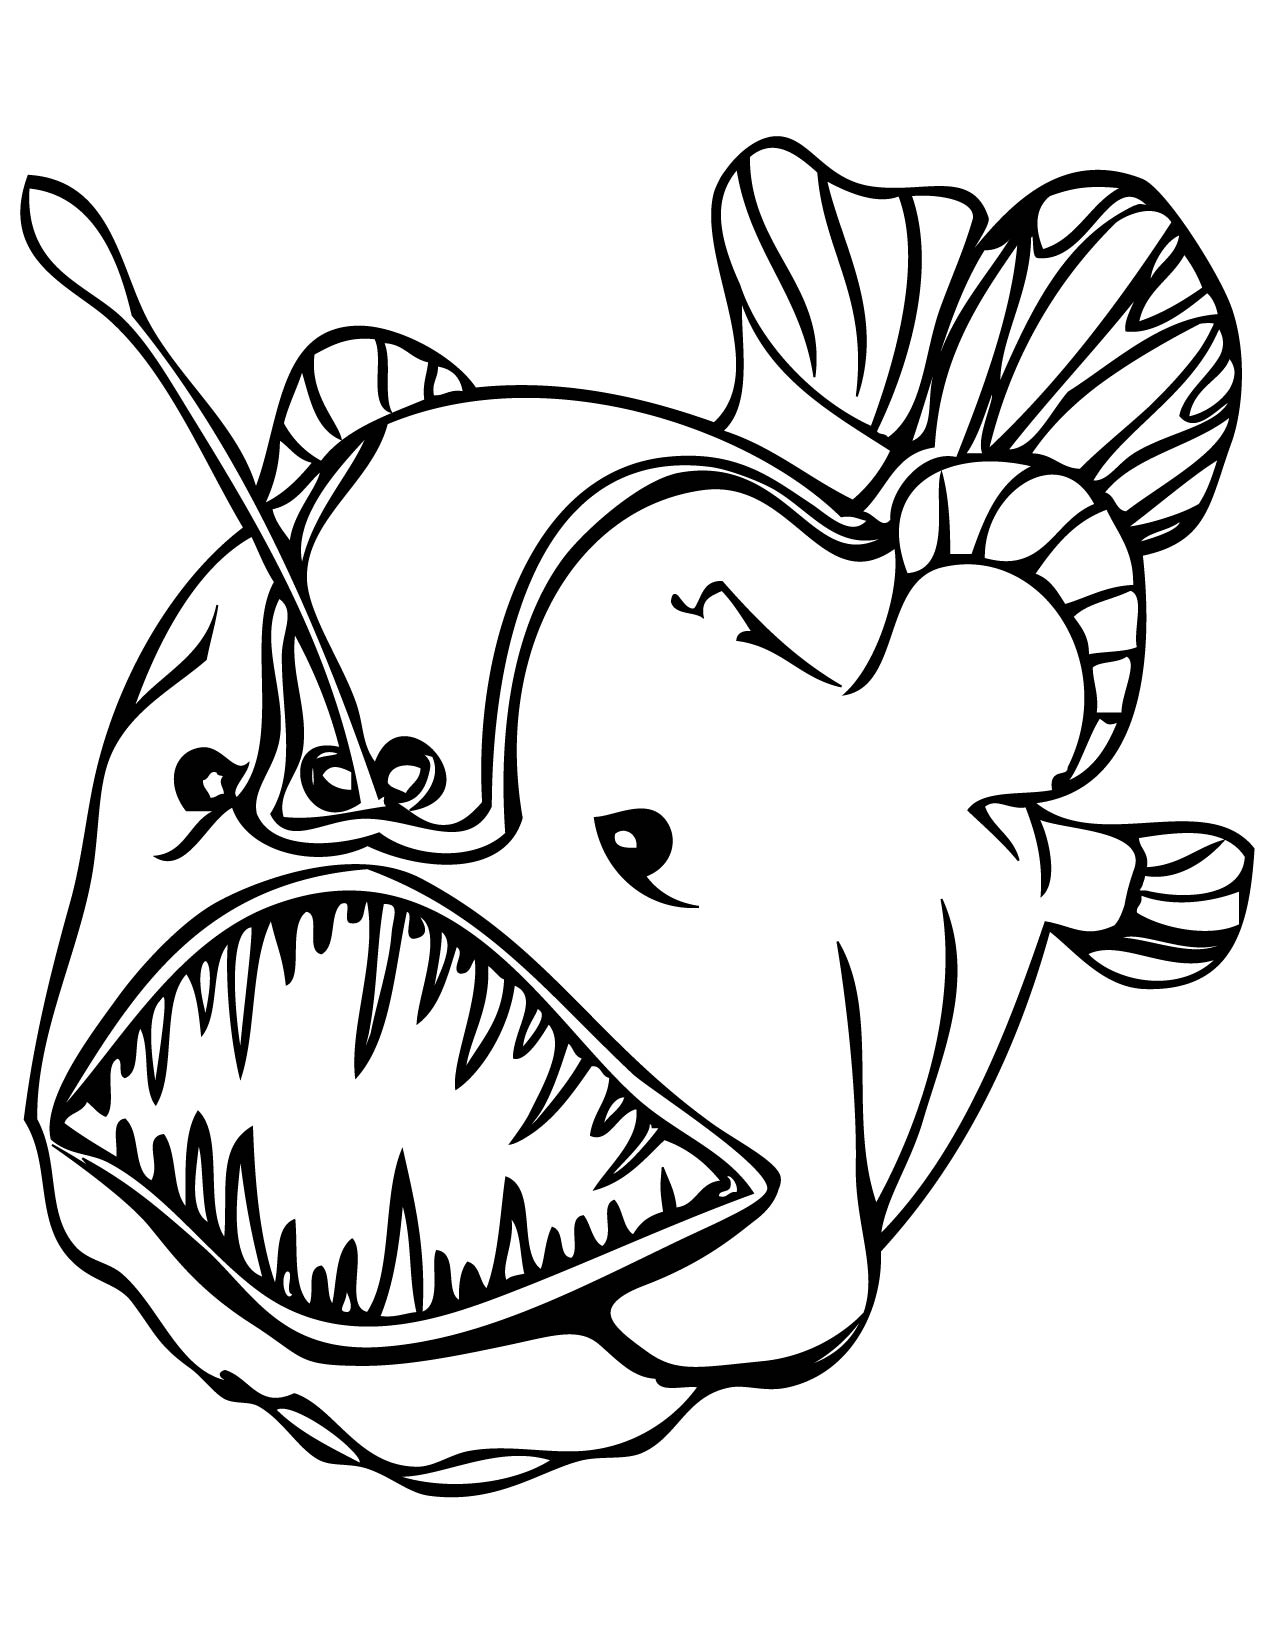 Scary Fish Coloring Page